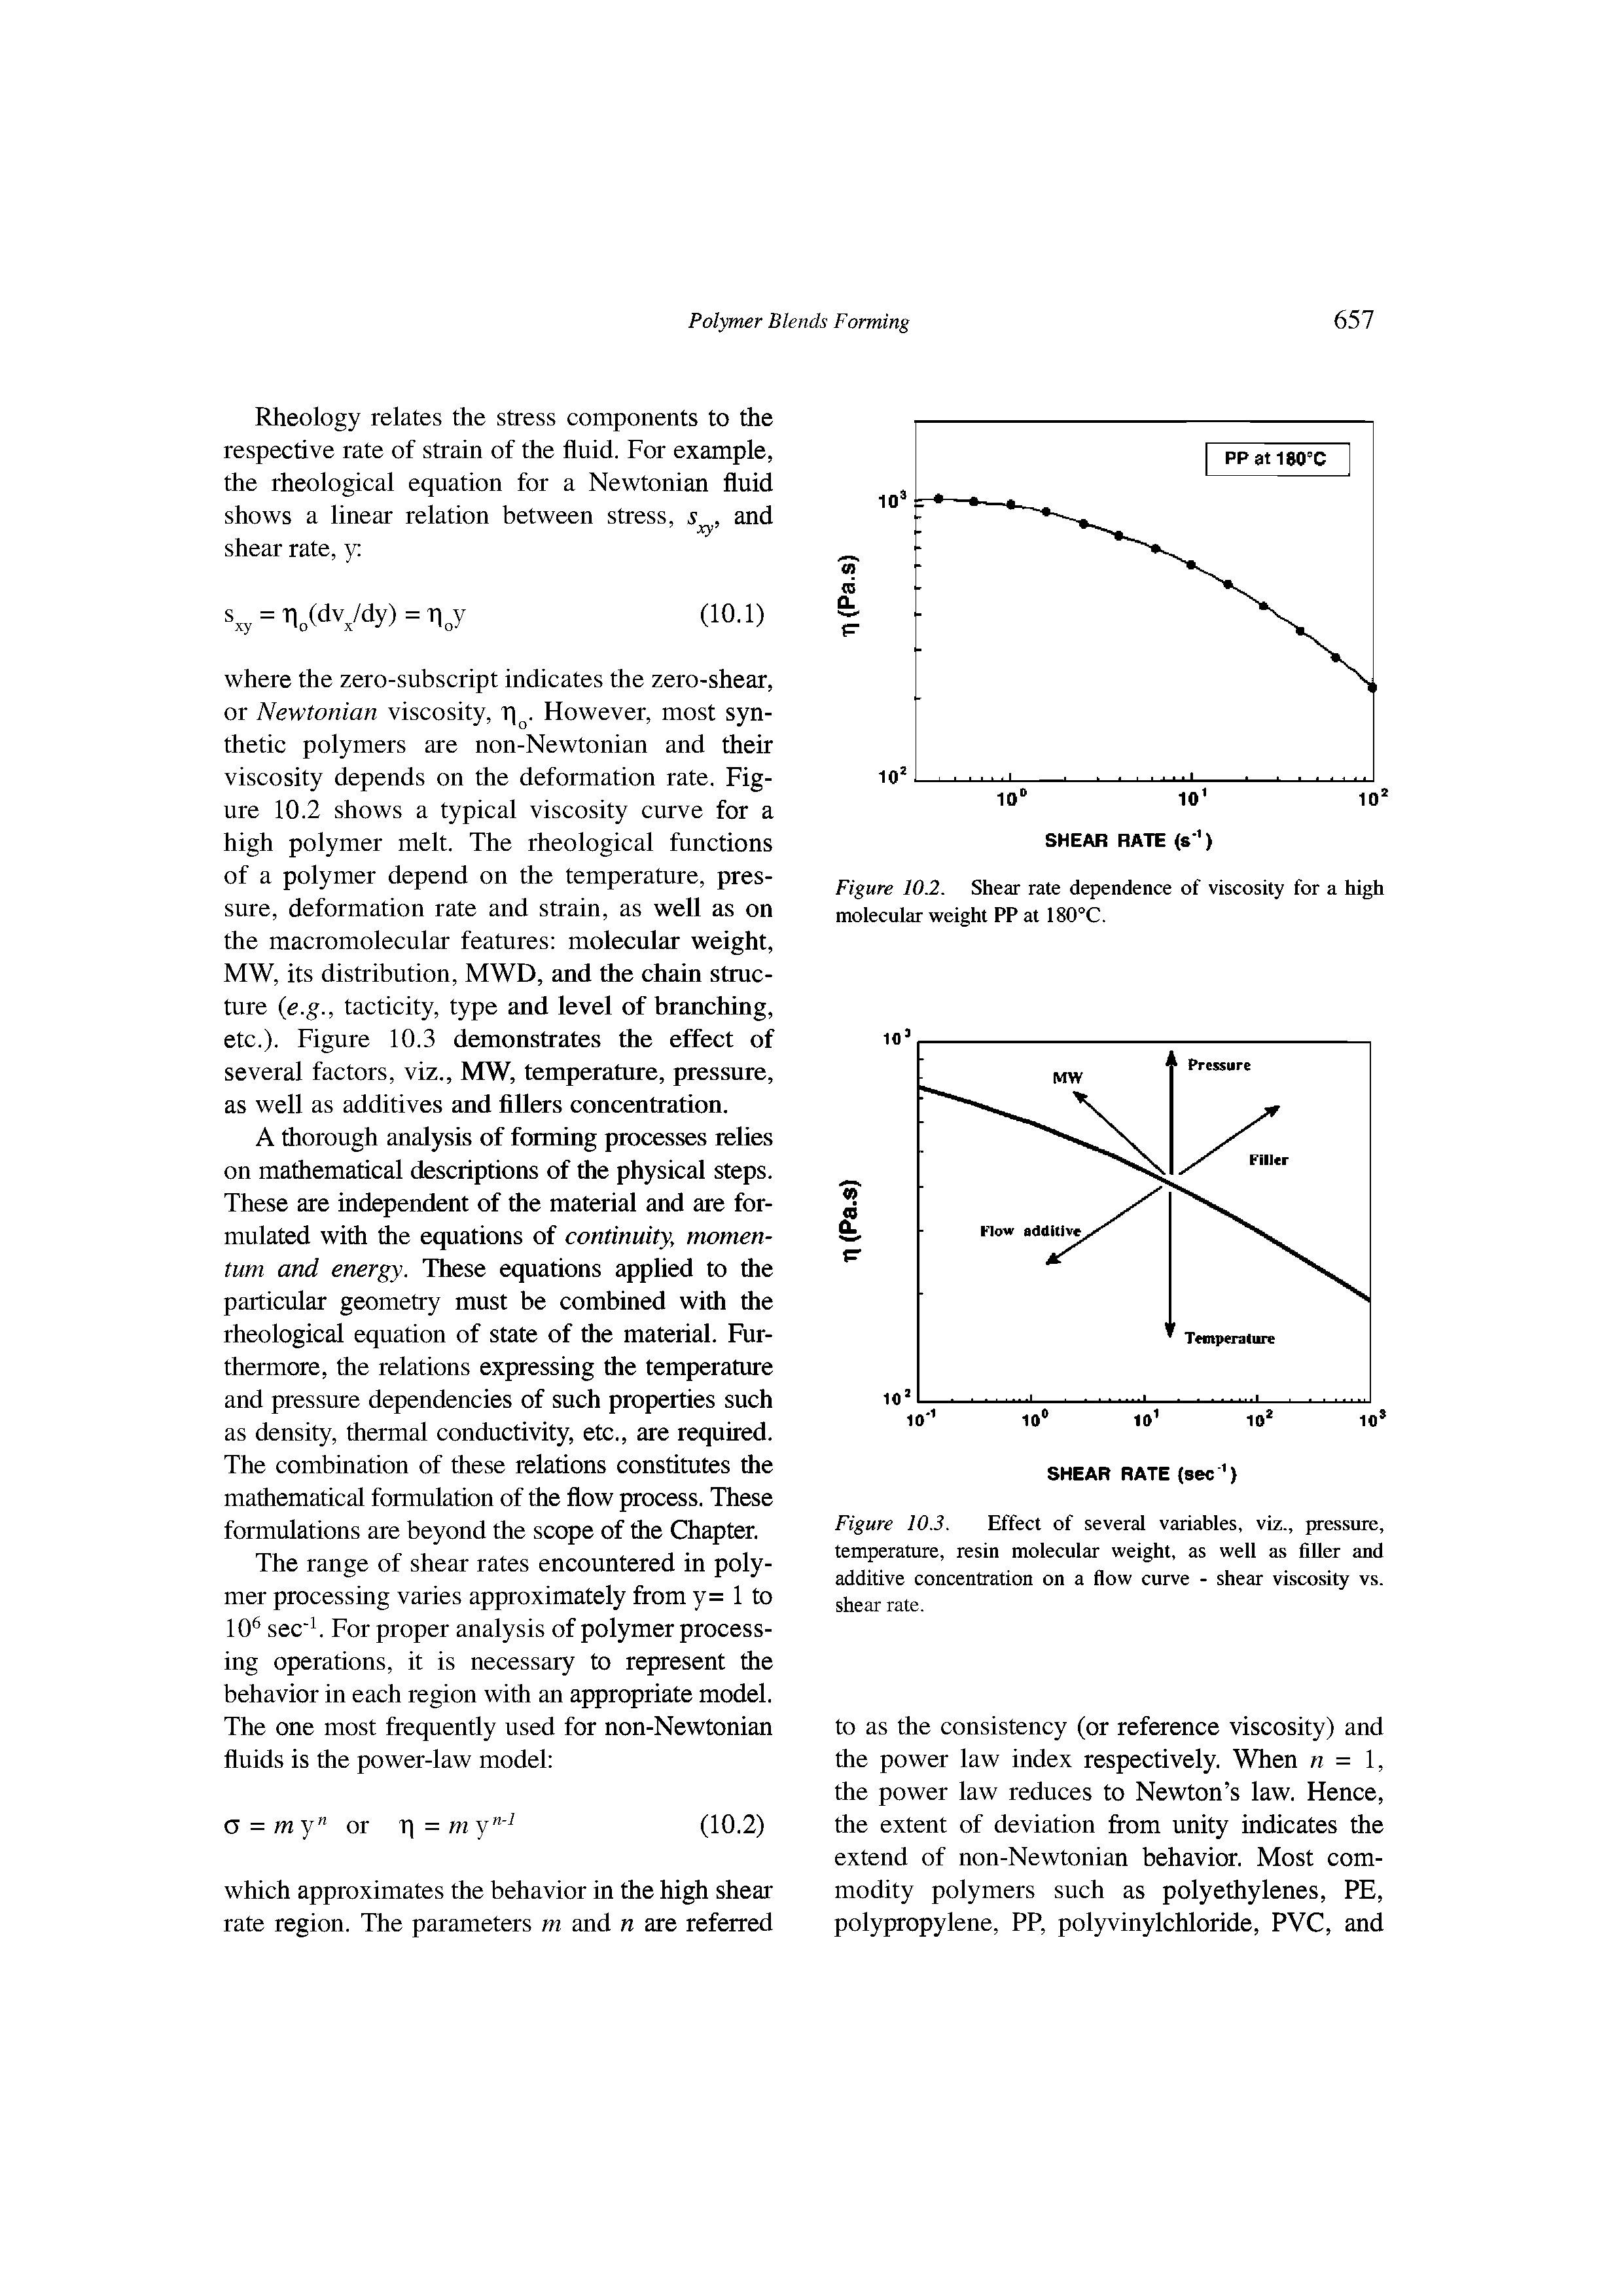 Figure 10.2. Shear rate dependence of viscosity for a high molecular weight PP at 180°C.